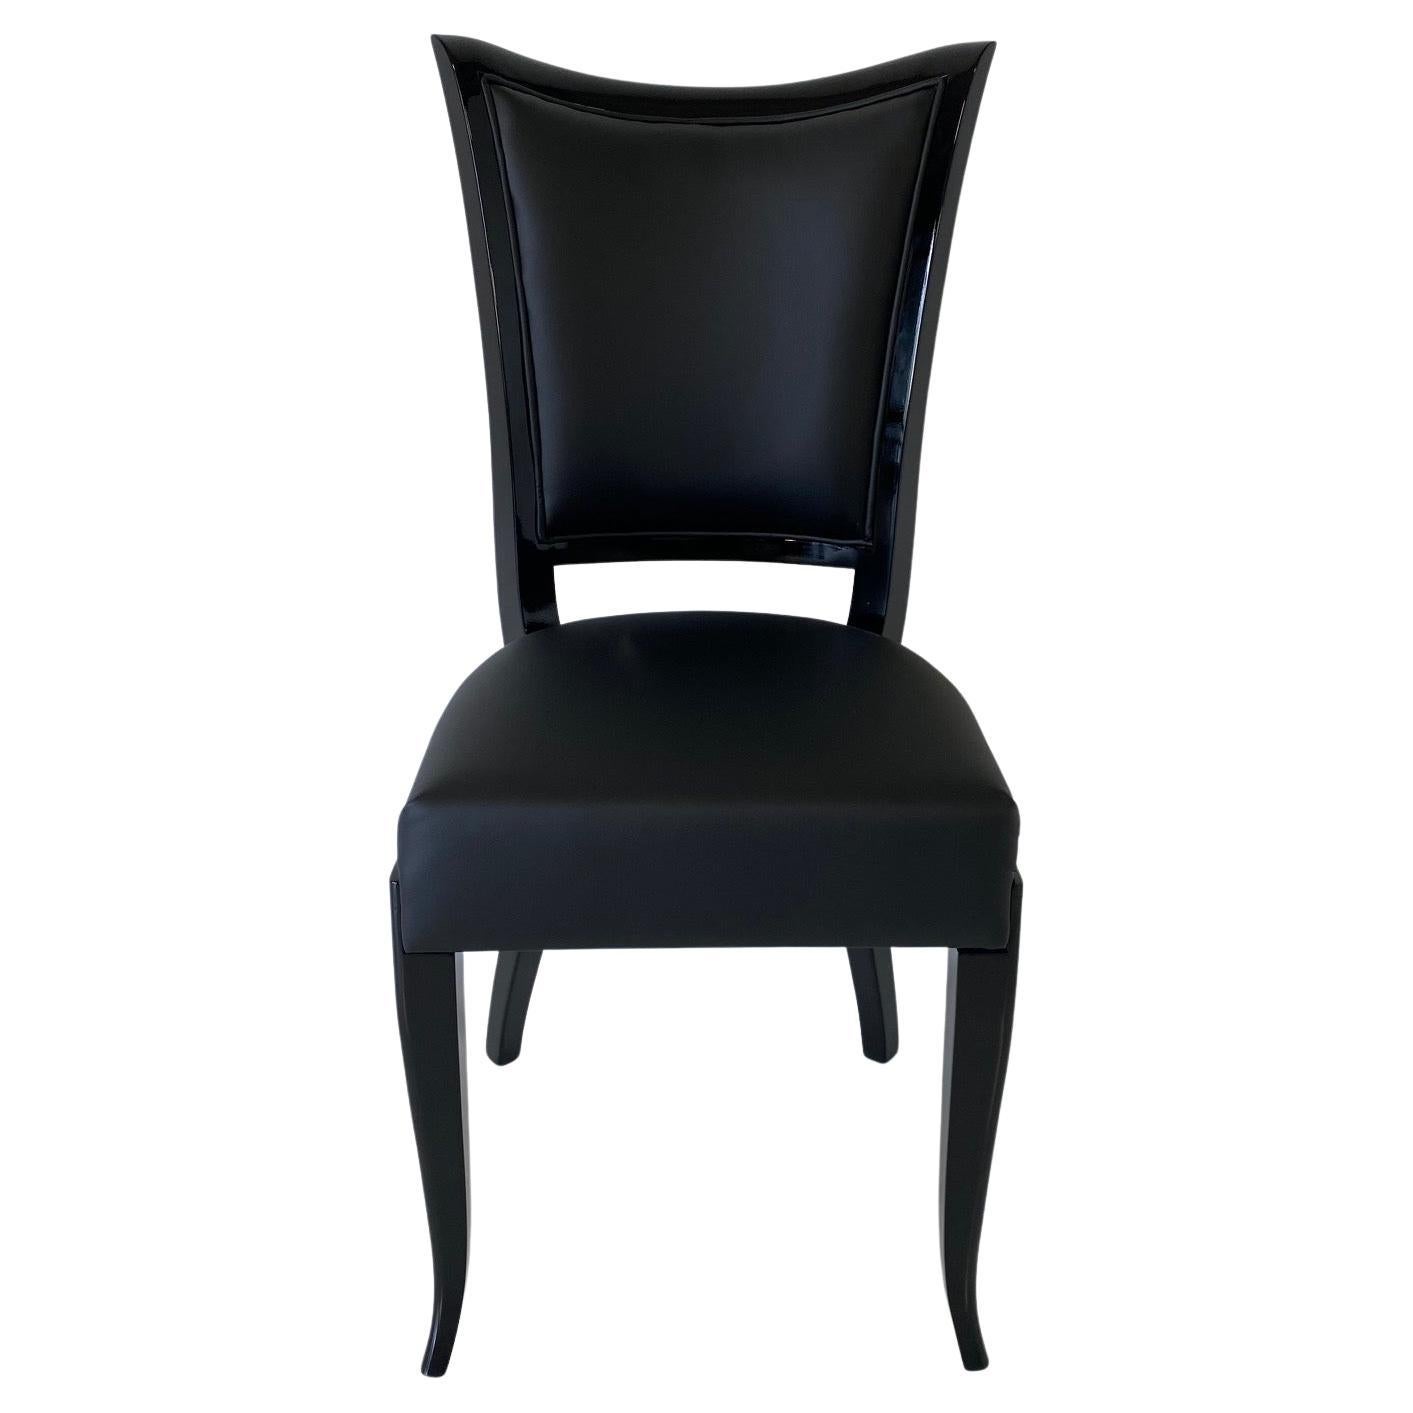 This set of eight Art Deco style chairs and two armchairs was produced in Italy in the 1980s. 
They are all completely black lacquered and covered in black faux leather. 

Measurements of the armchairs: 74 cm x 64 cm, total H 100 cm, seat H 50